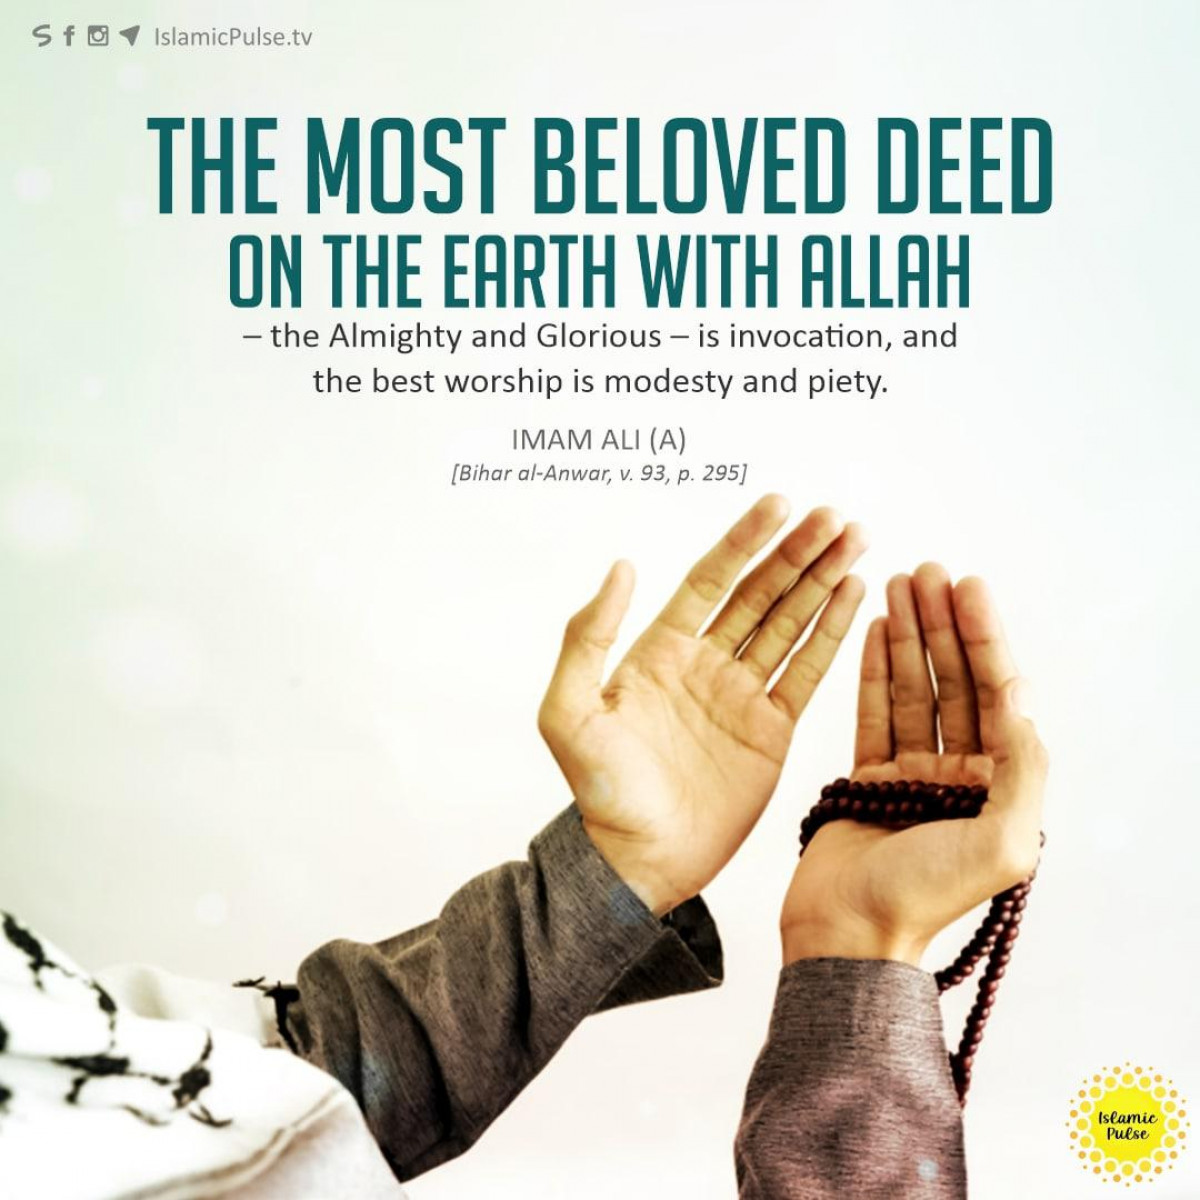 The most beloved deed on the earth with Allah